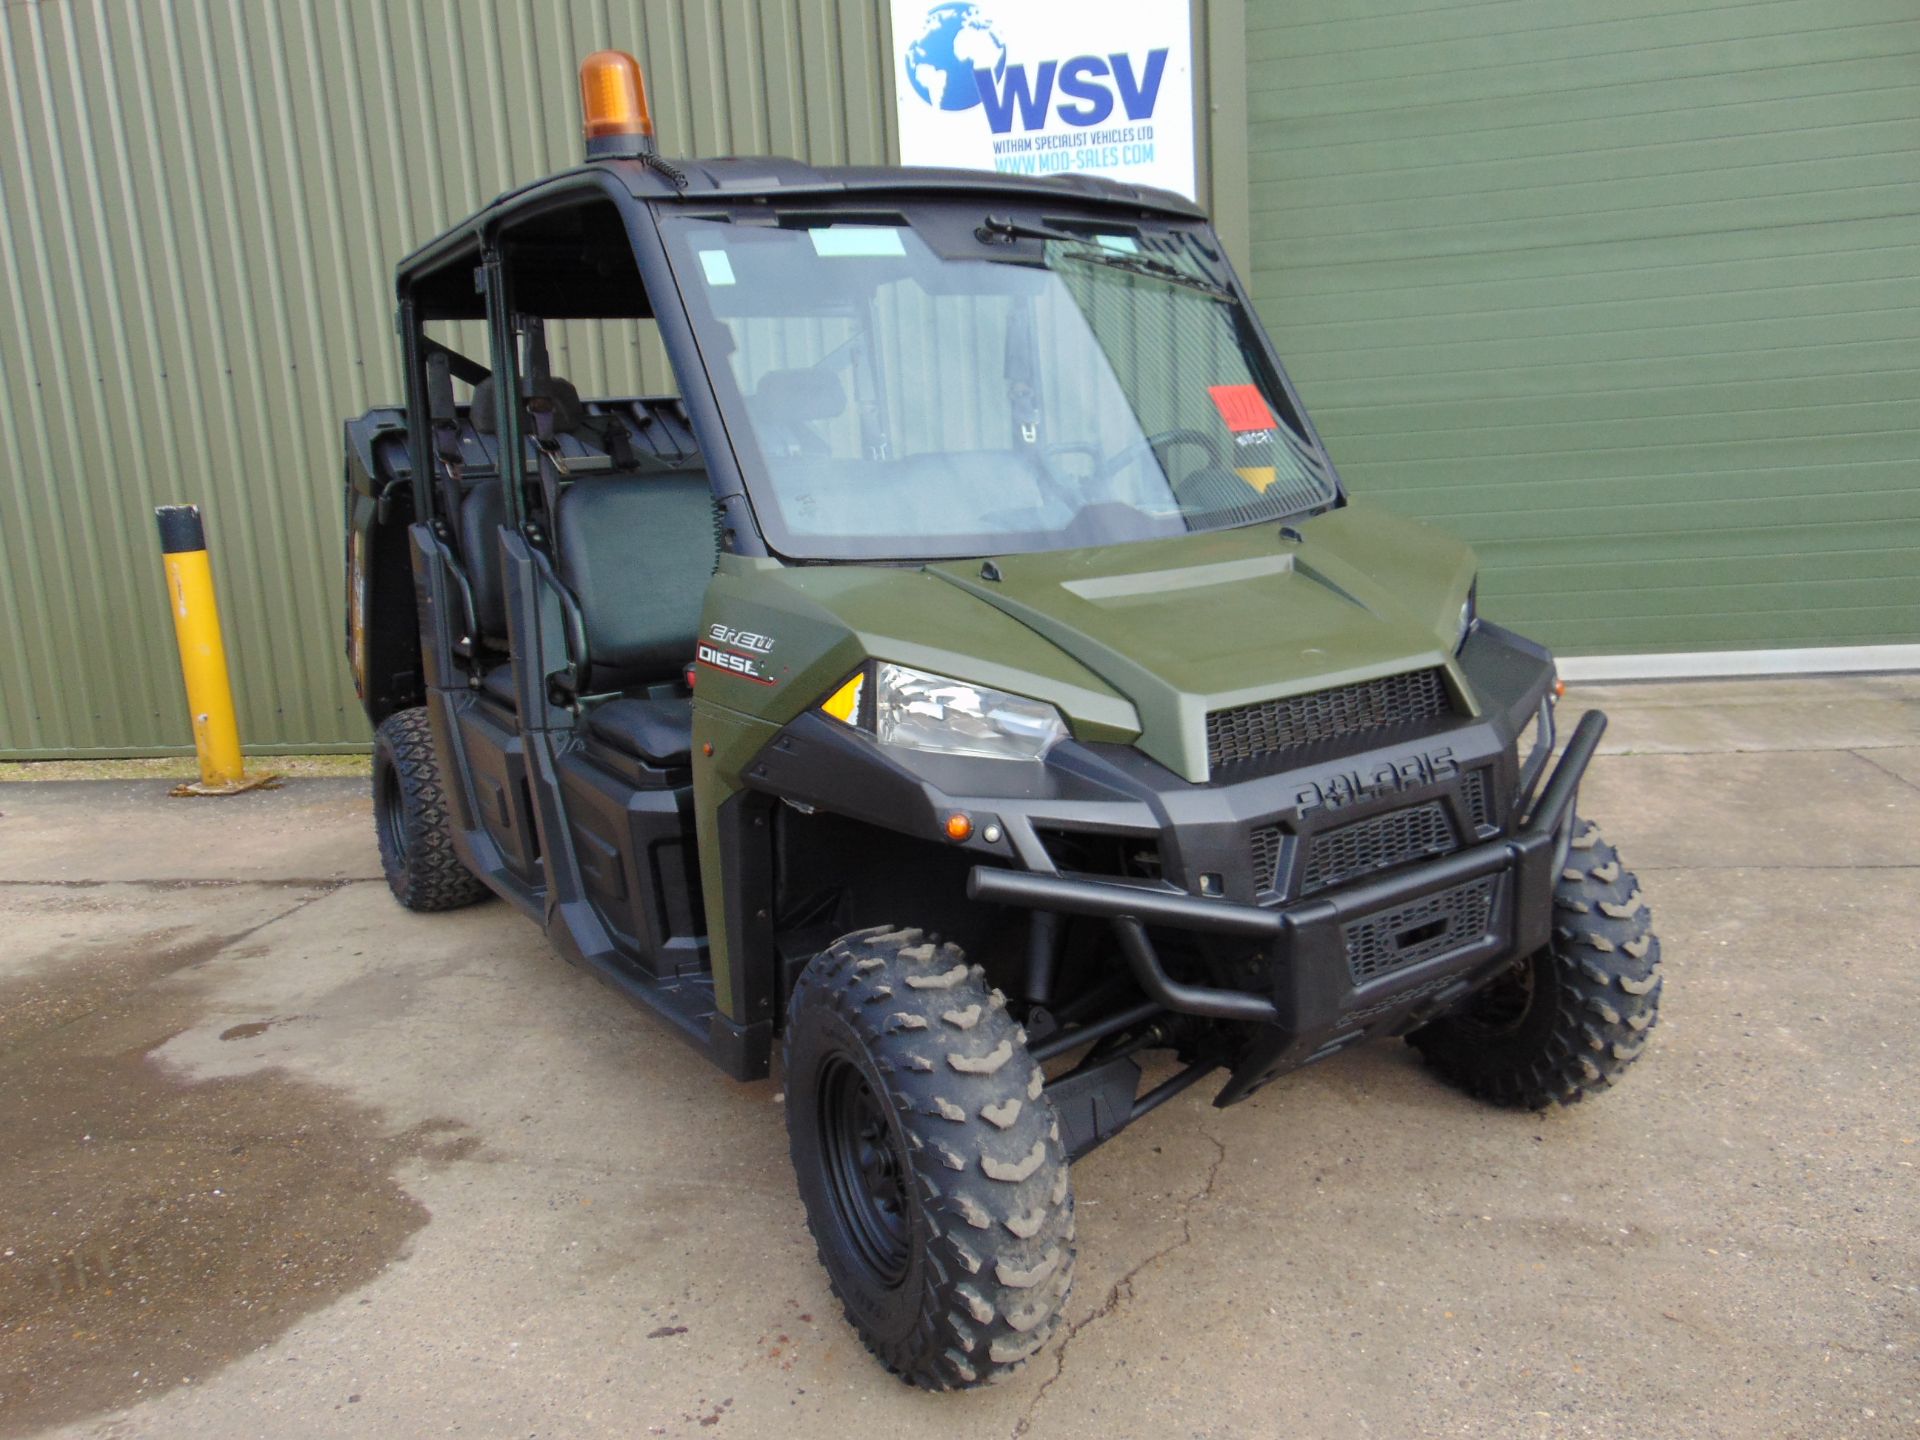 Polaris Ranger Crew Cab Diesel Utility Vehicle 1,190 Hrs only from Govt Dept - Image 10 of 25